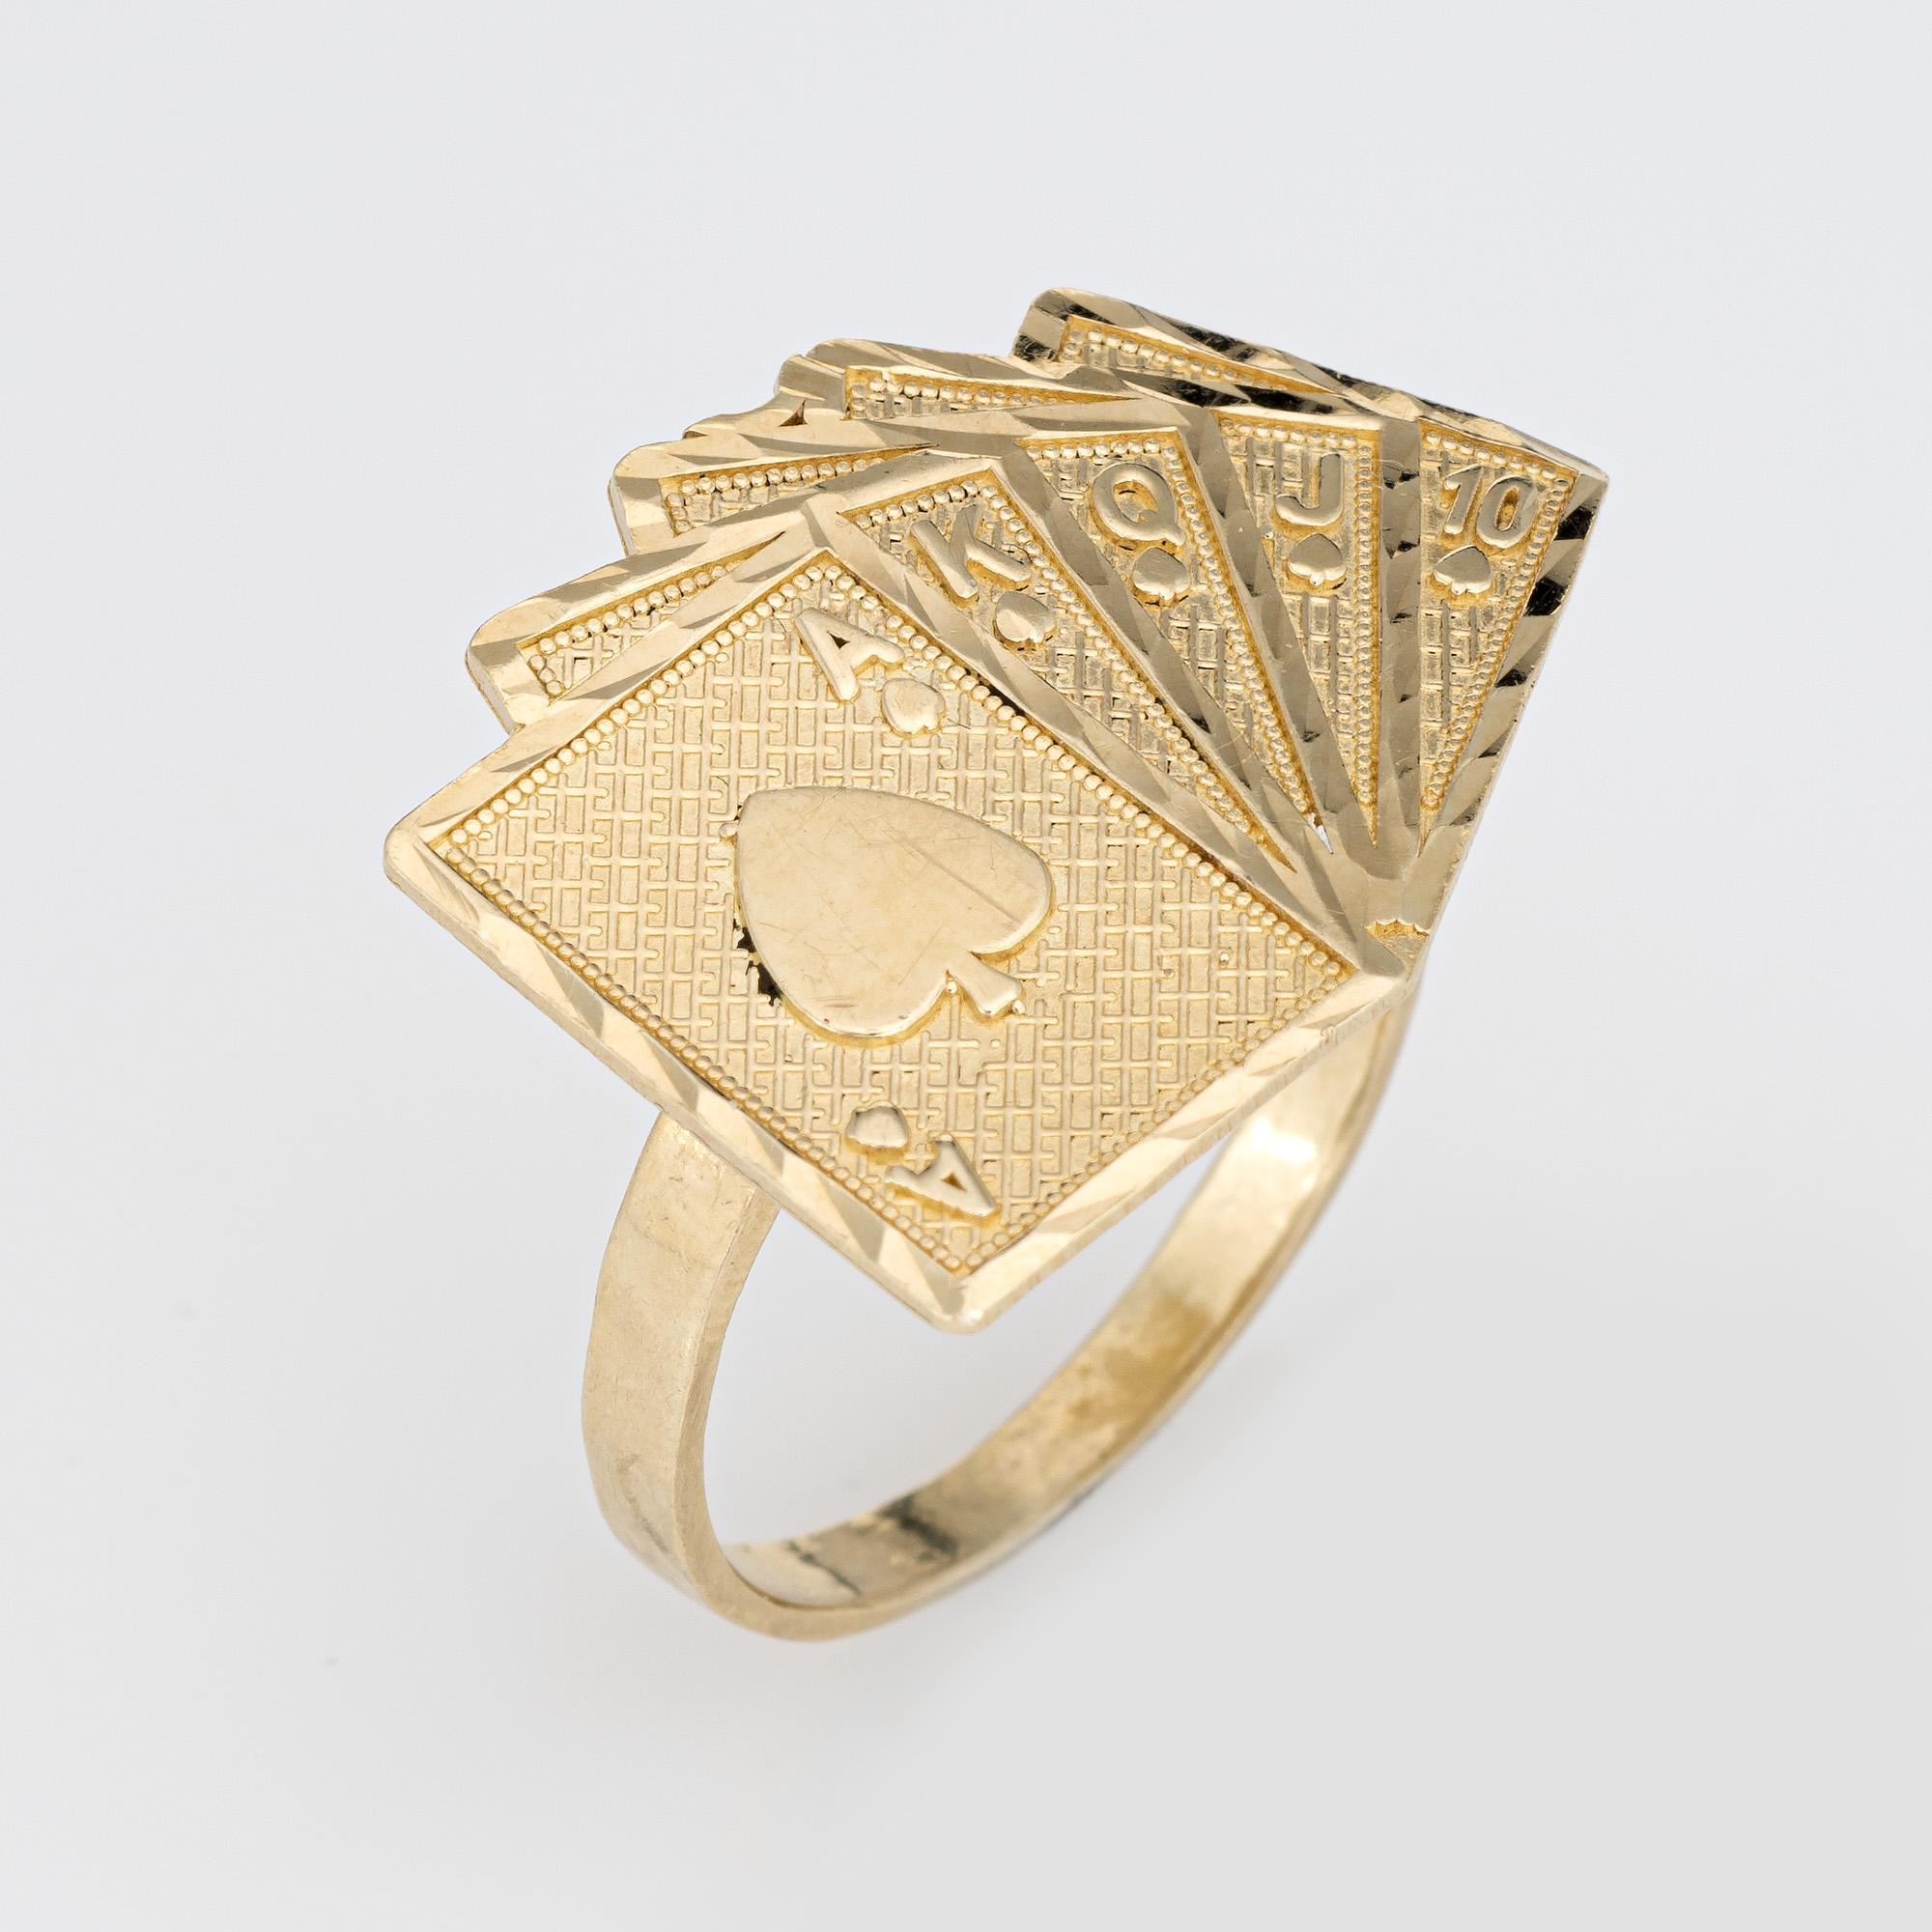 Finely detailed Deck of Cards ring crafted in 10 karat yellow gold. 

The royal flush is represented with an Ace of Hearts, King, Queen, Jack and 10 card. The ring sits flat on the finger, rising 2mm from the finger (0.07 inches).  

The ring is in